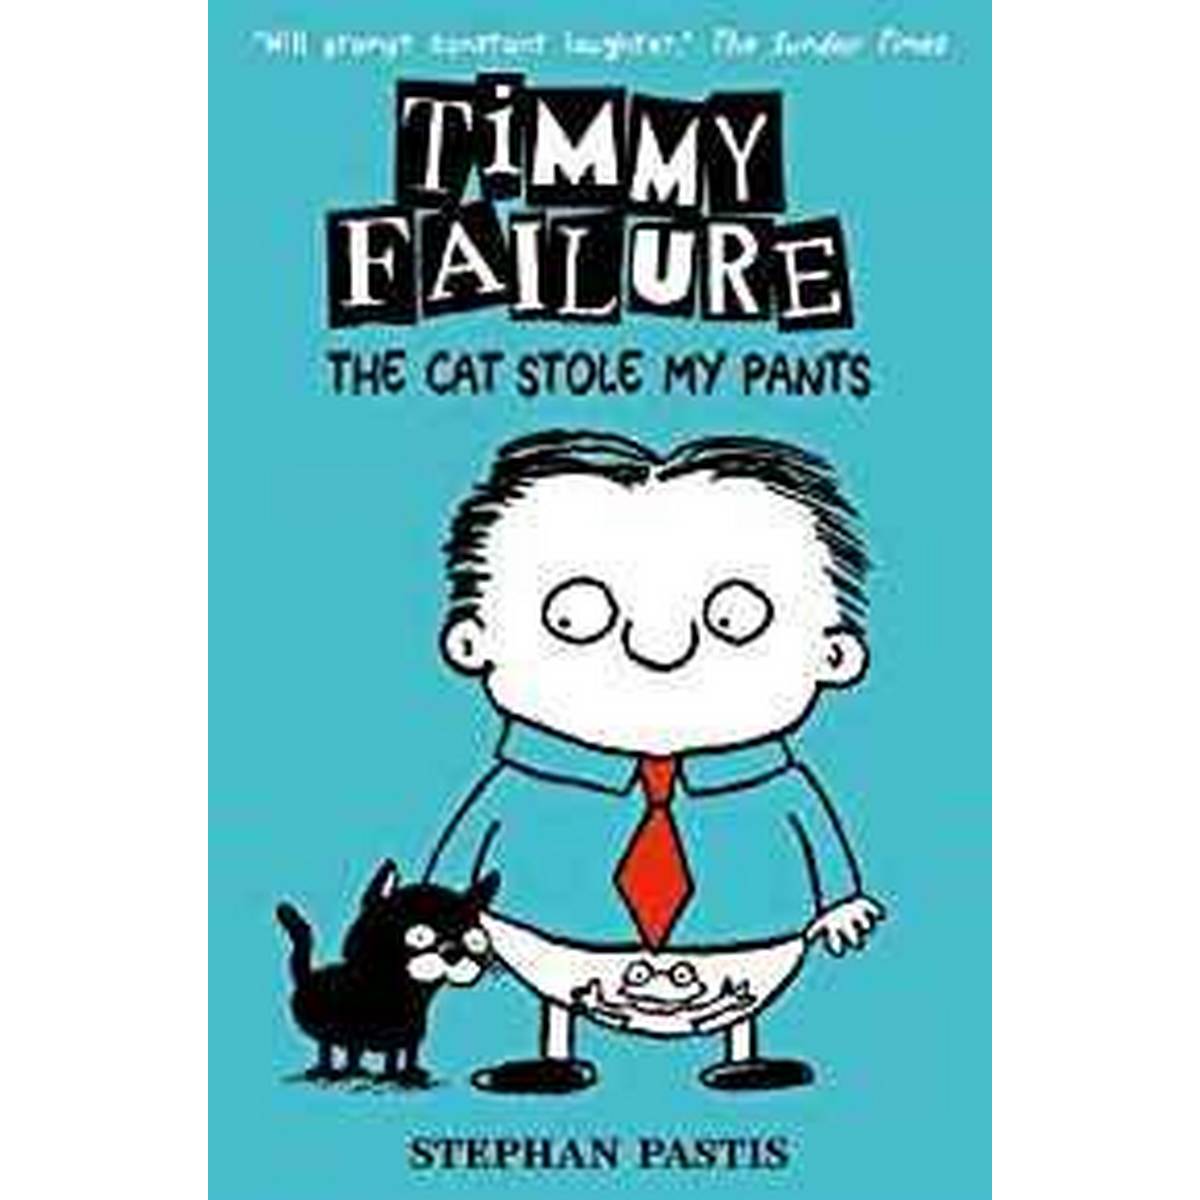 Timmy Failure: 6 The Cat Stole My Pants